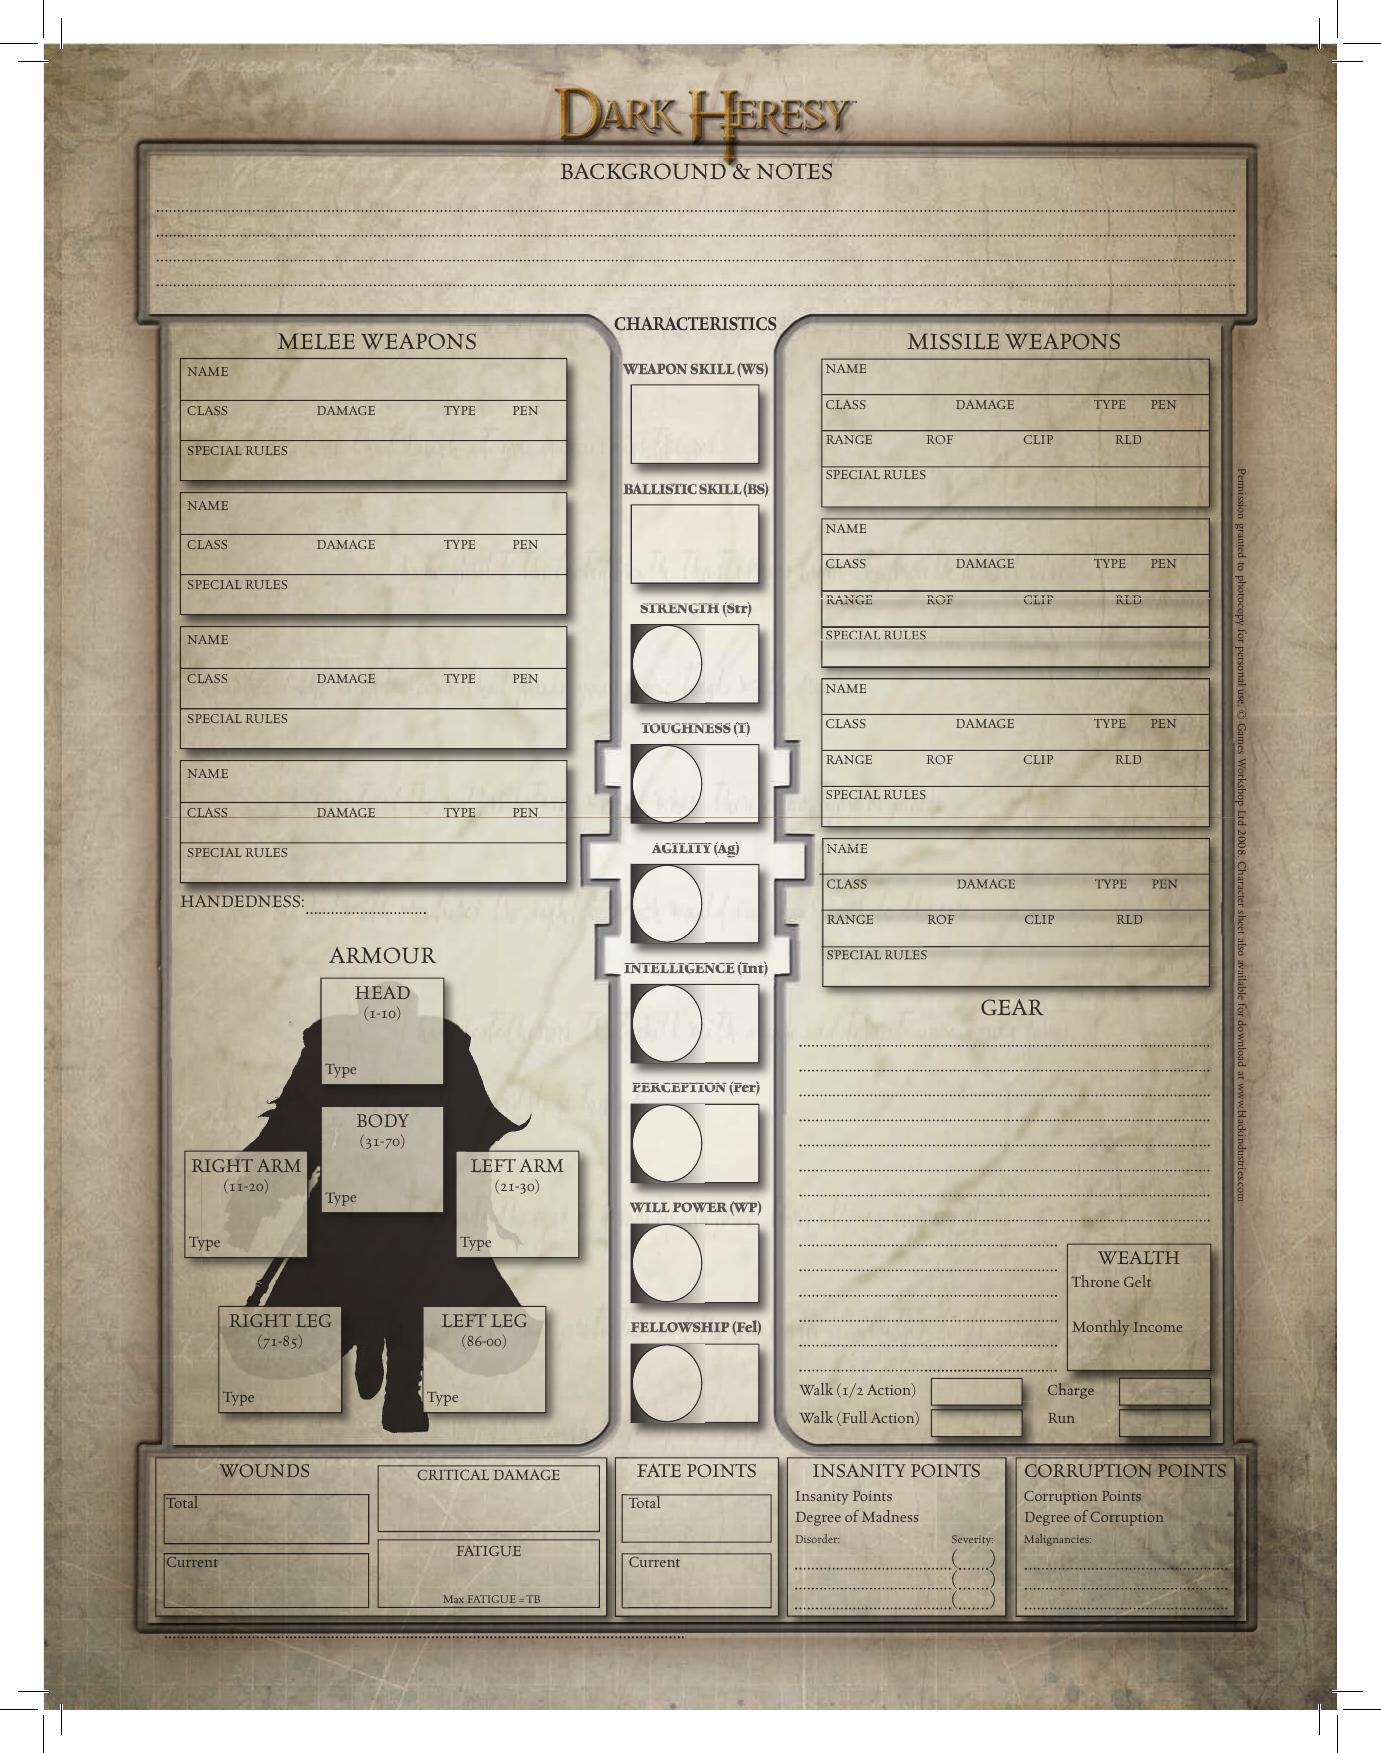 Character Sheet - 2 pages